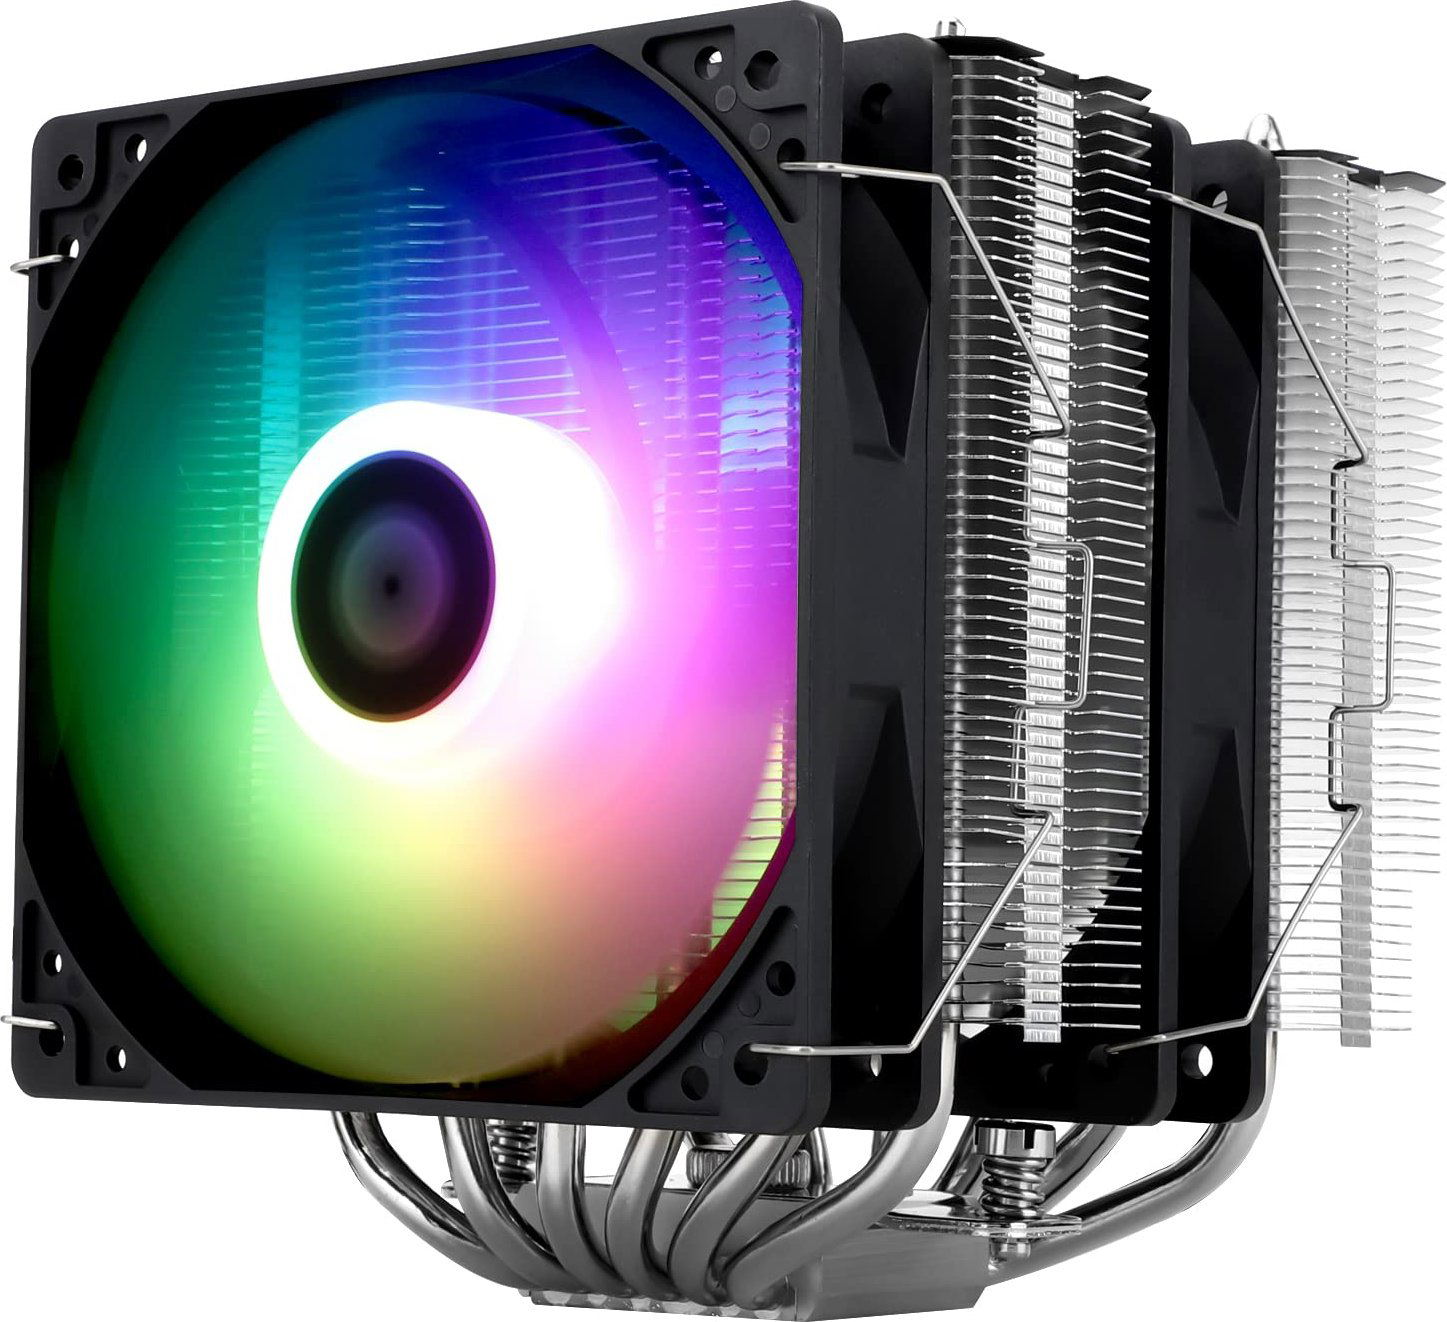 Fans & CPU Coolers